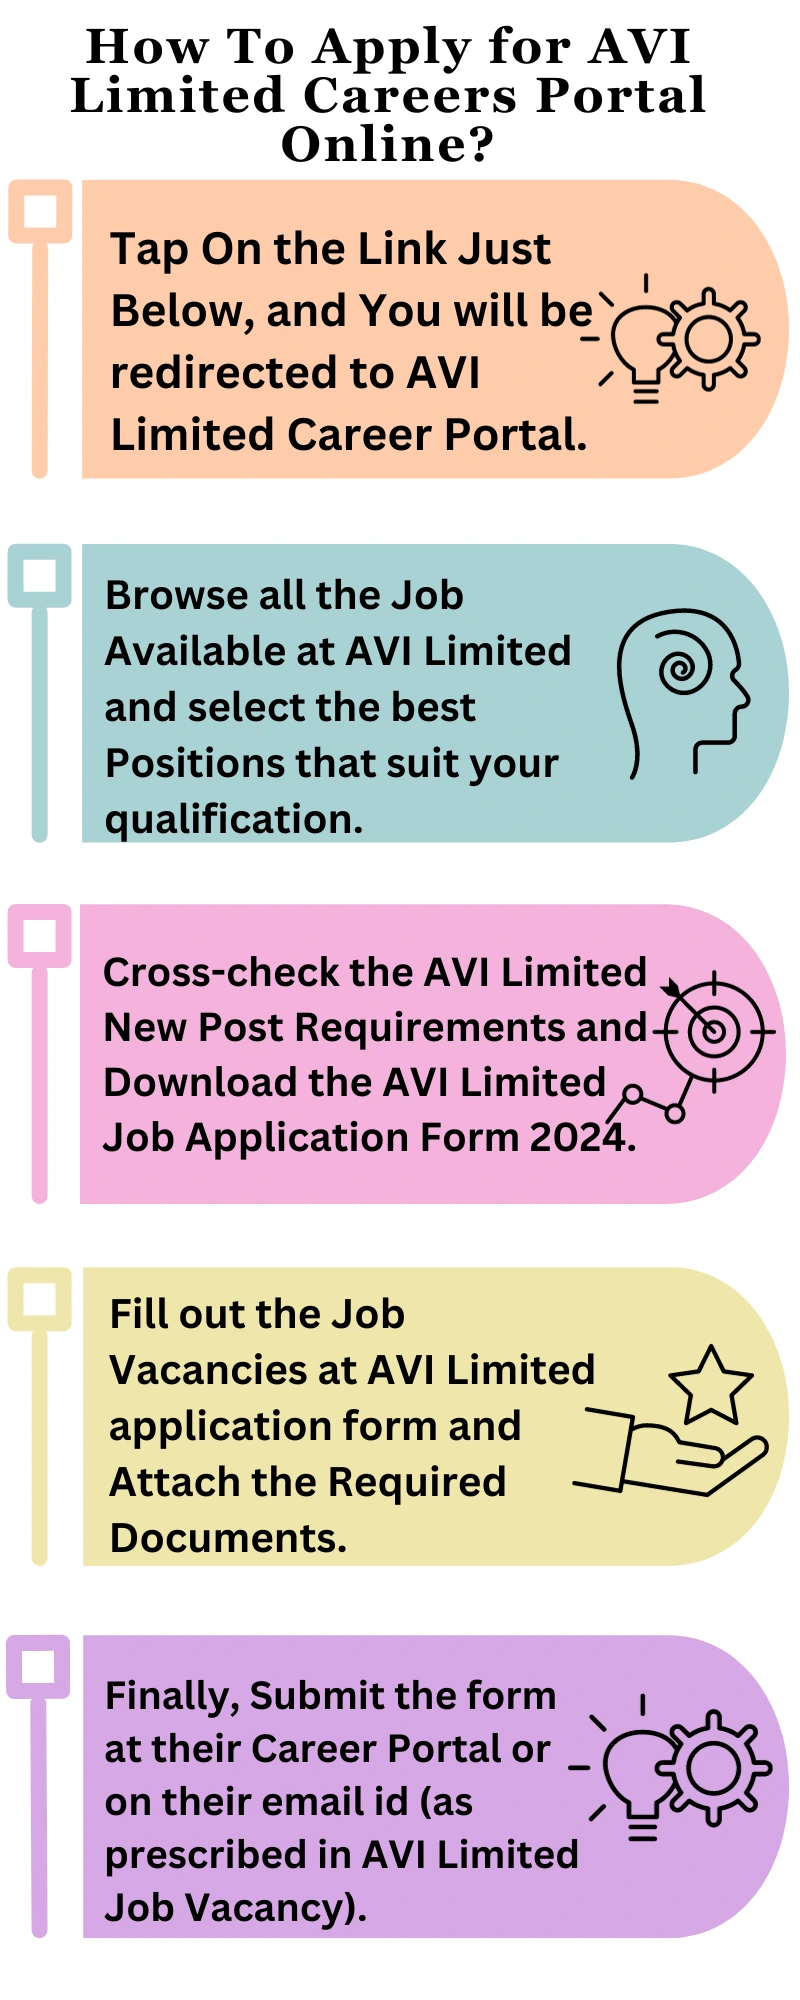 How To Apply for AVI Limited Careers Portal Online?